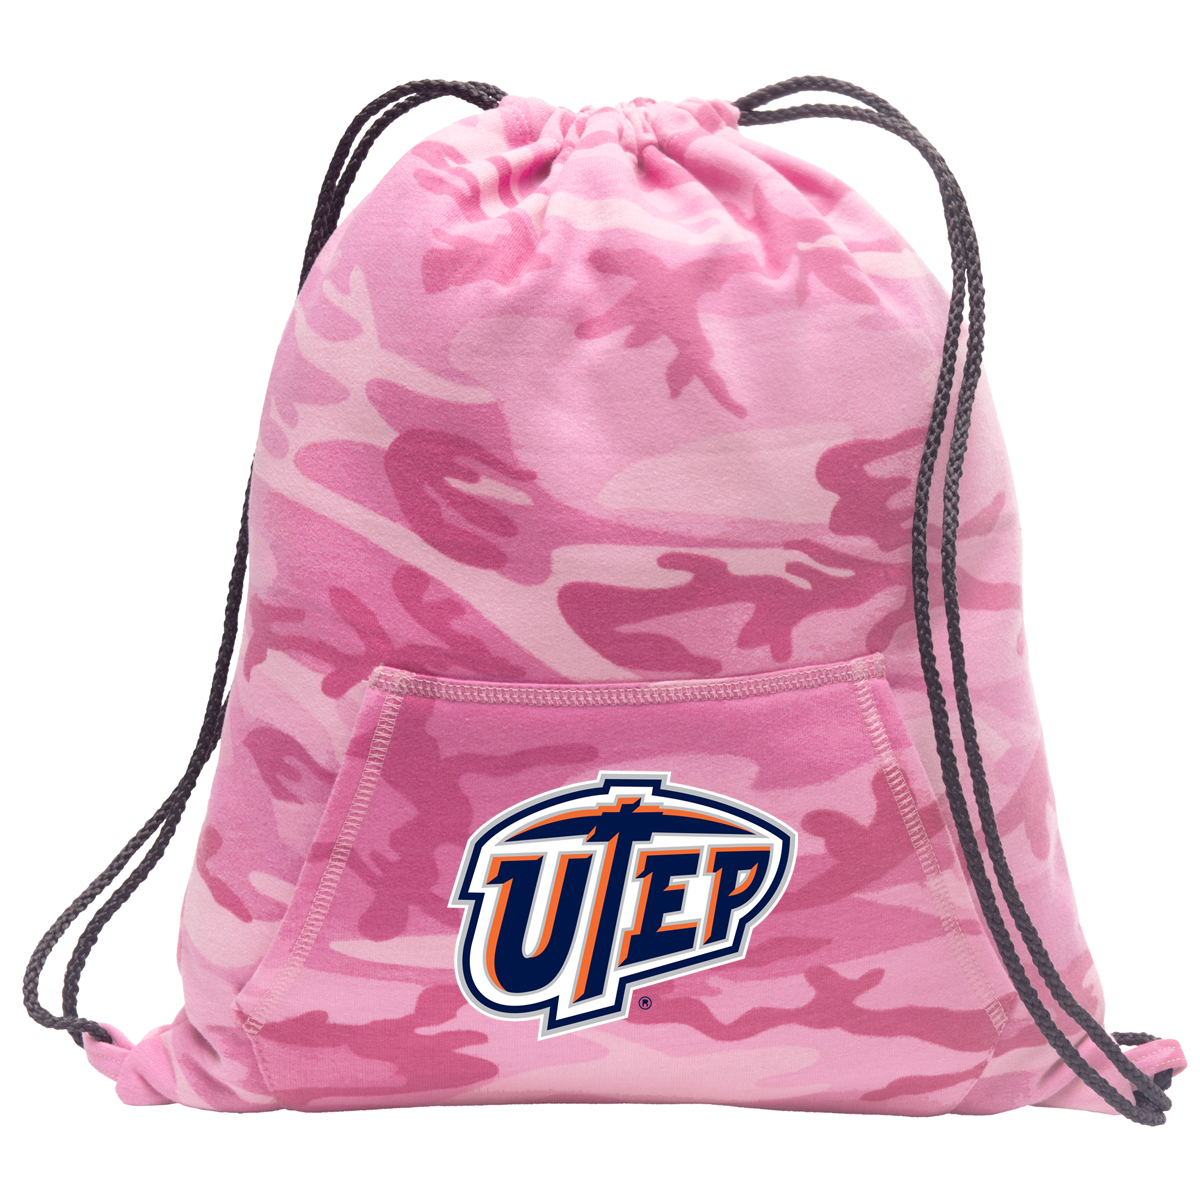 Girls UTEP Drawstring Backpack Pink Camo UTEP Miners Cinch Pack for Girls Women Her - image 1 of 3